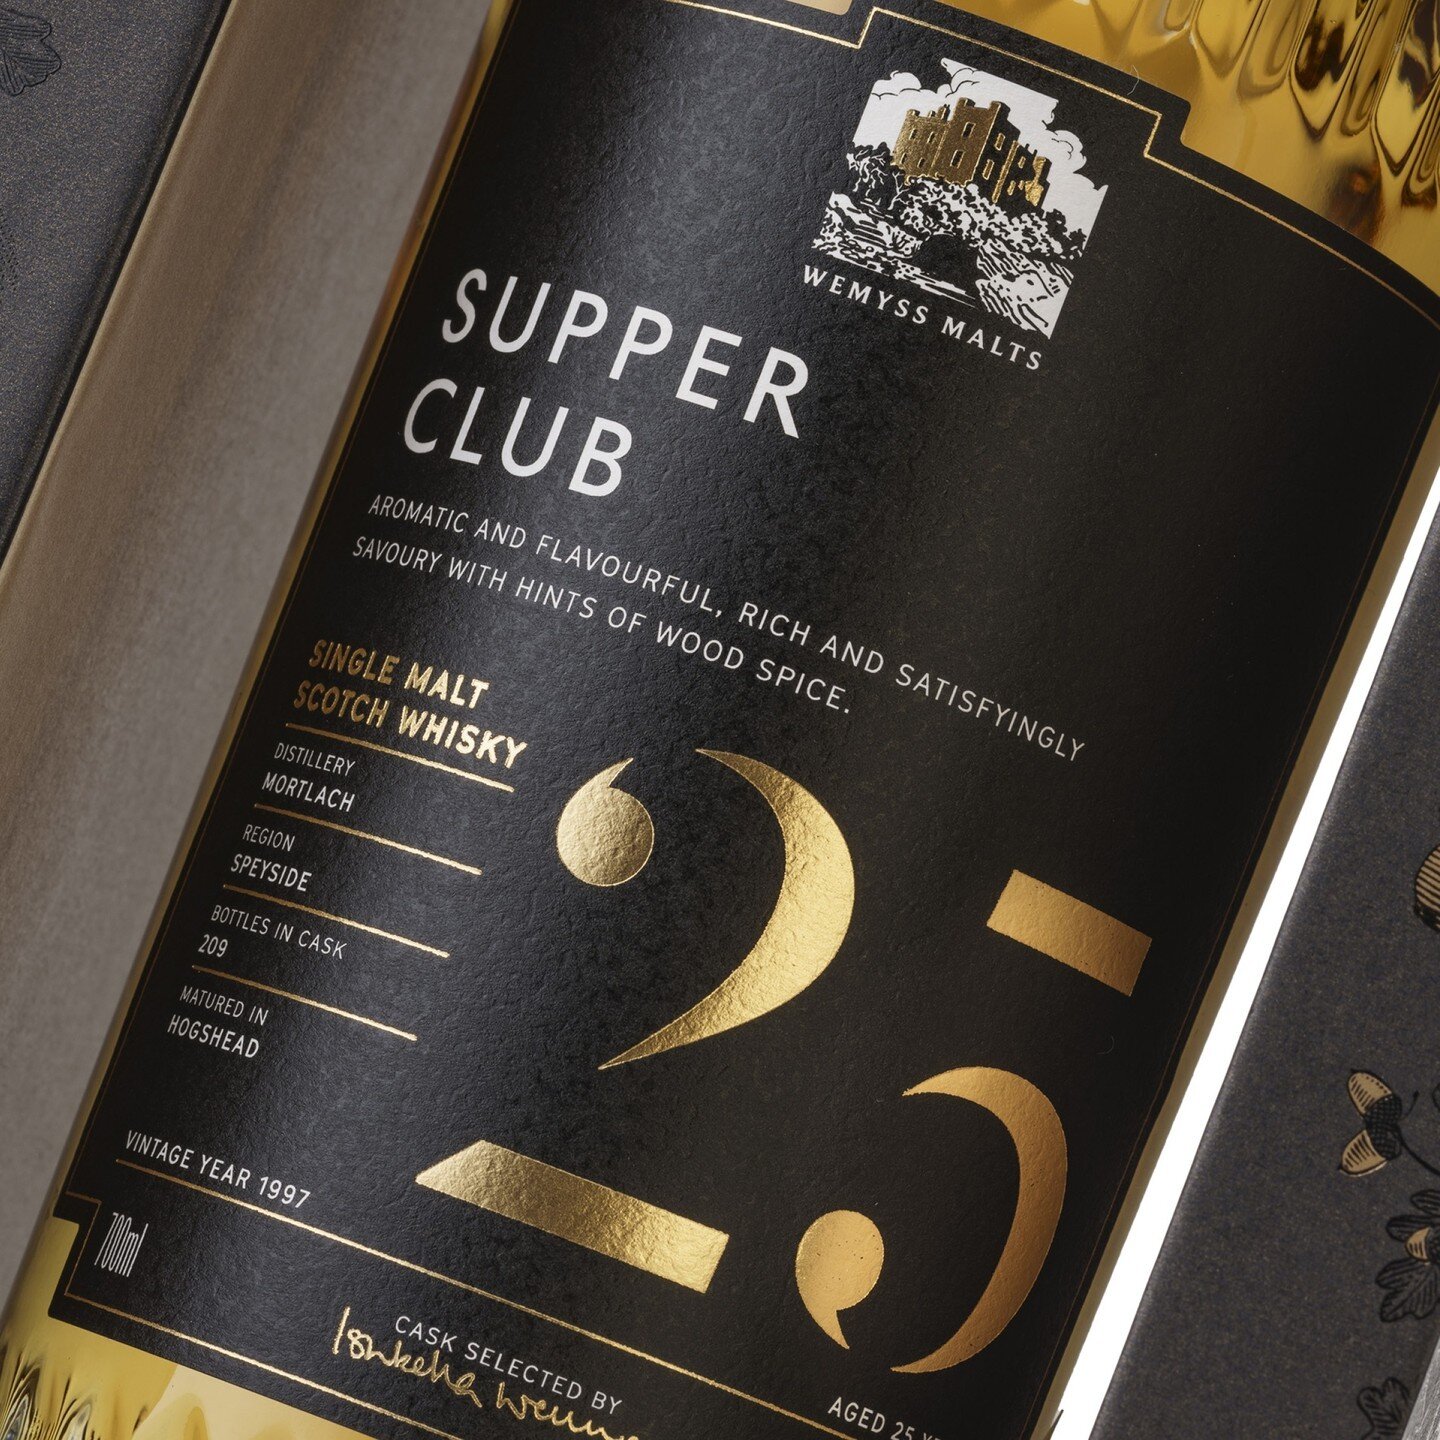 An aromatic, flavourful dram that's rich and satisfyingly savoury, with hints of wood and spice.

From the heart of Speyside, our whisky curators have selected this single cask from Mortlach for its characteristically savoury notes and alluring peppe